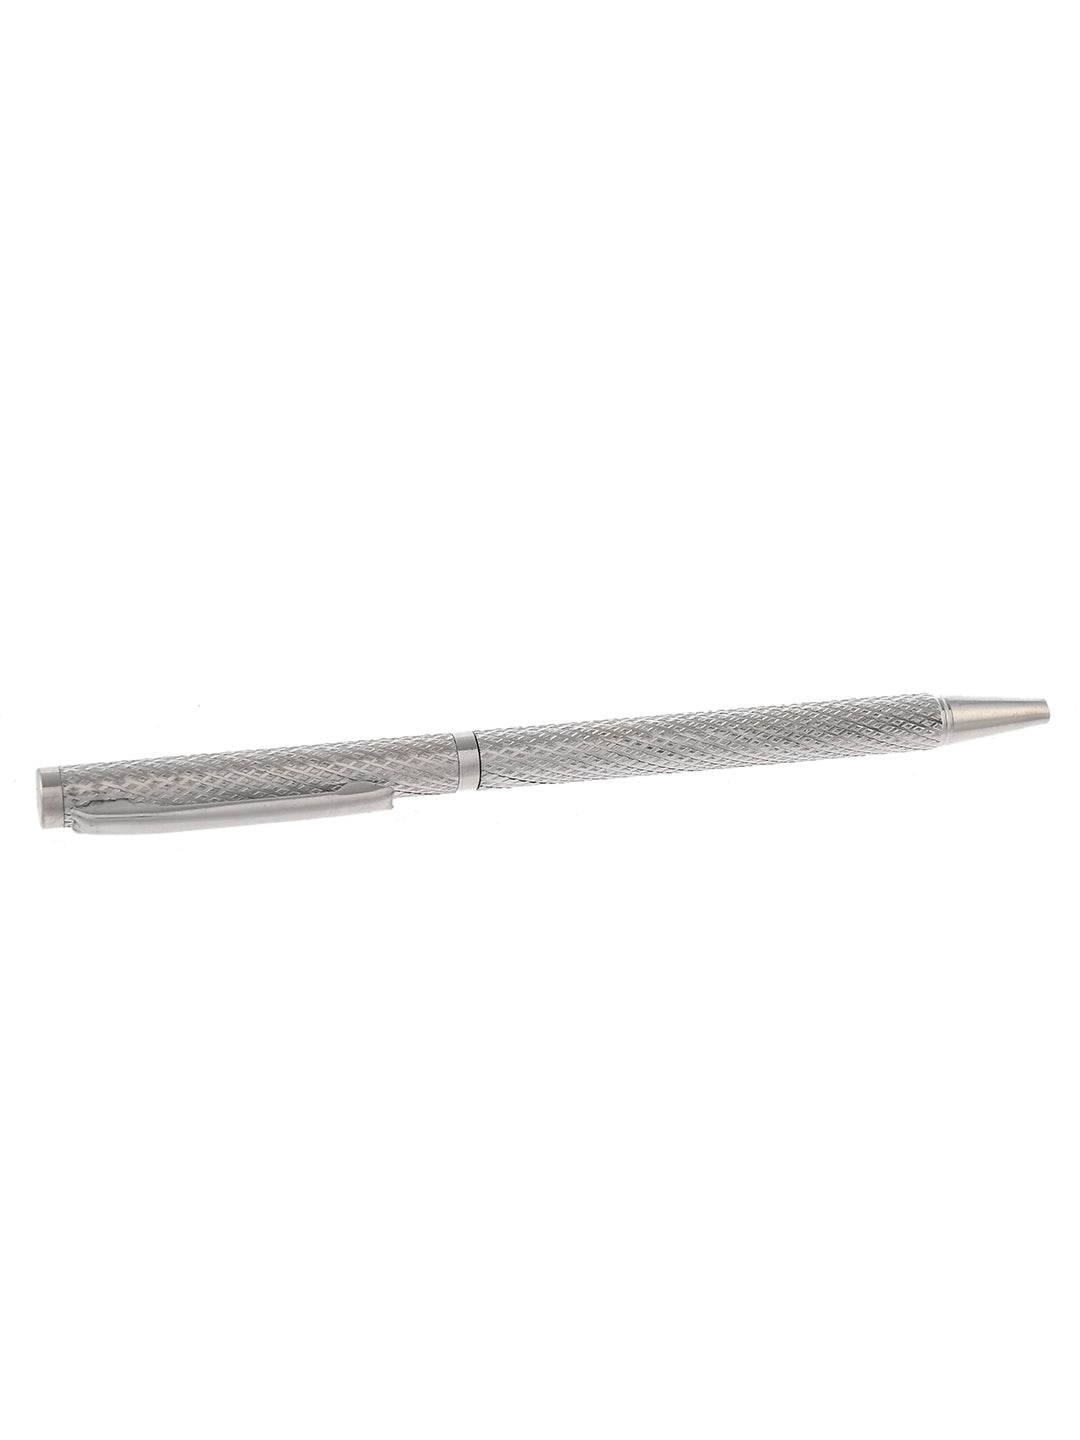 999 Sterling Silver Pen for Gifting/Office